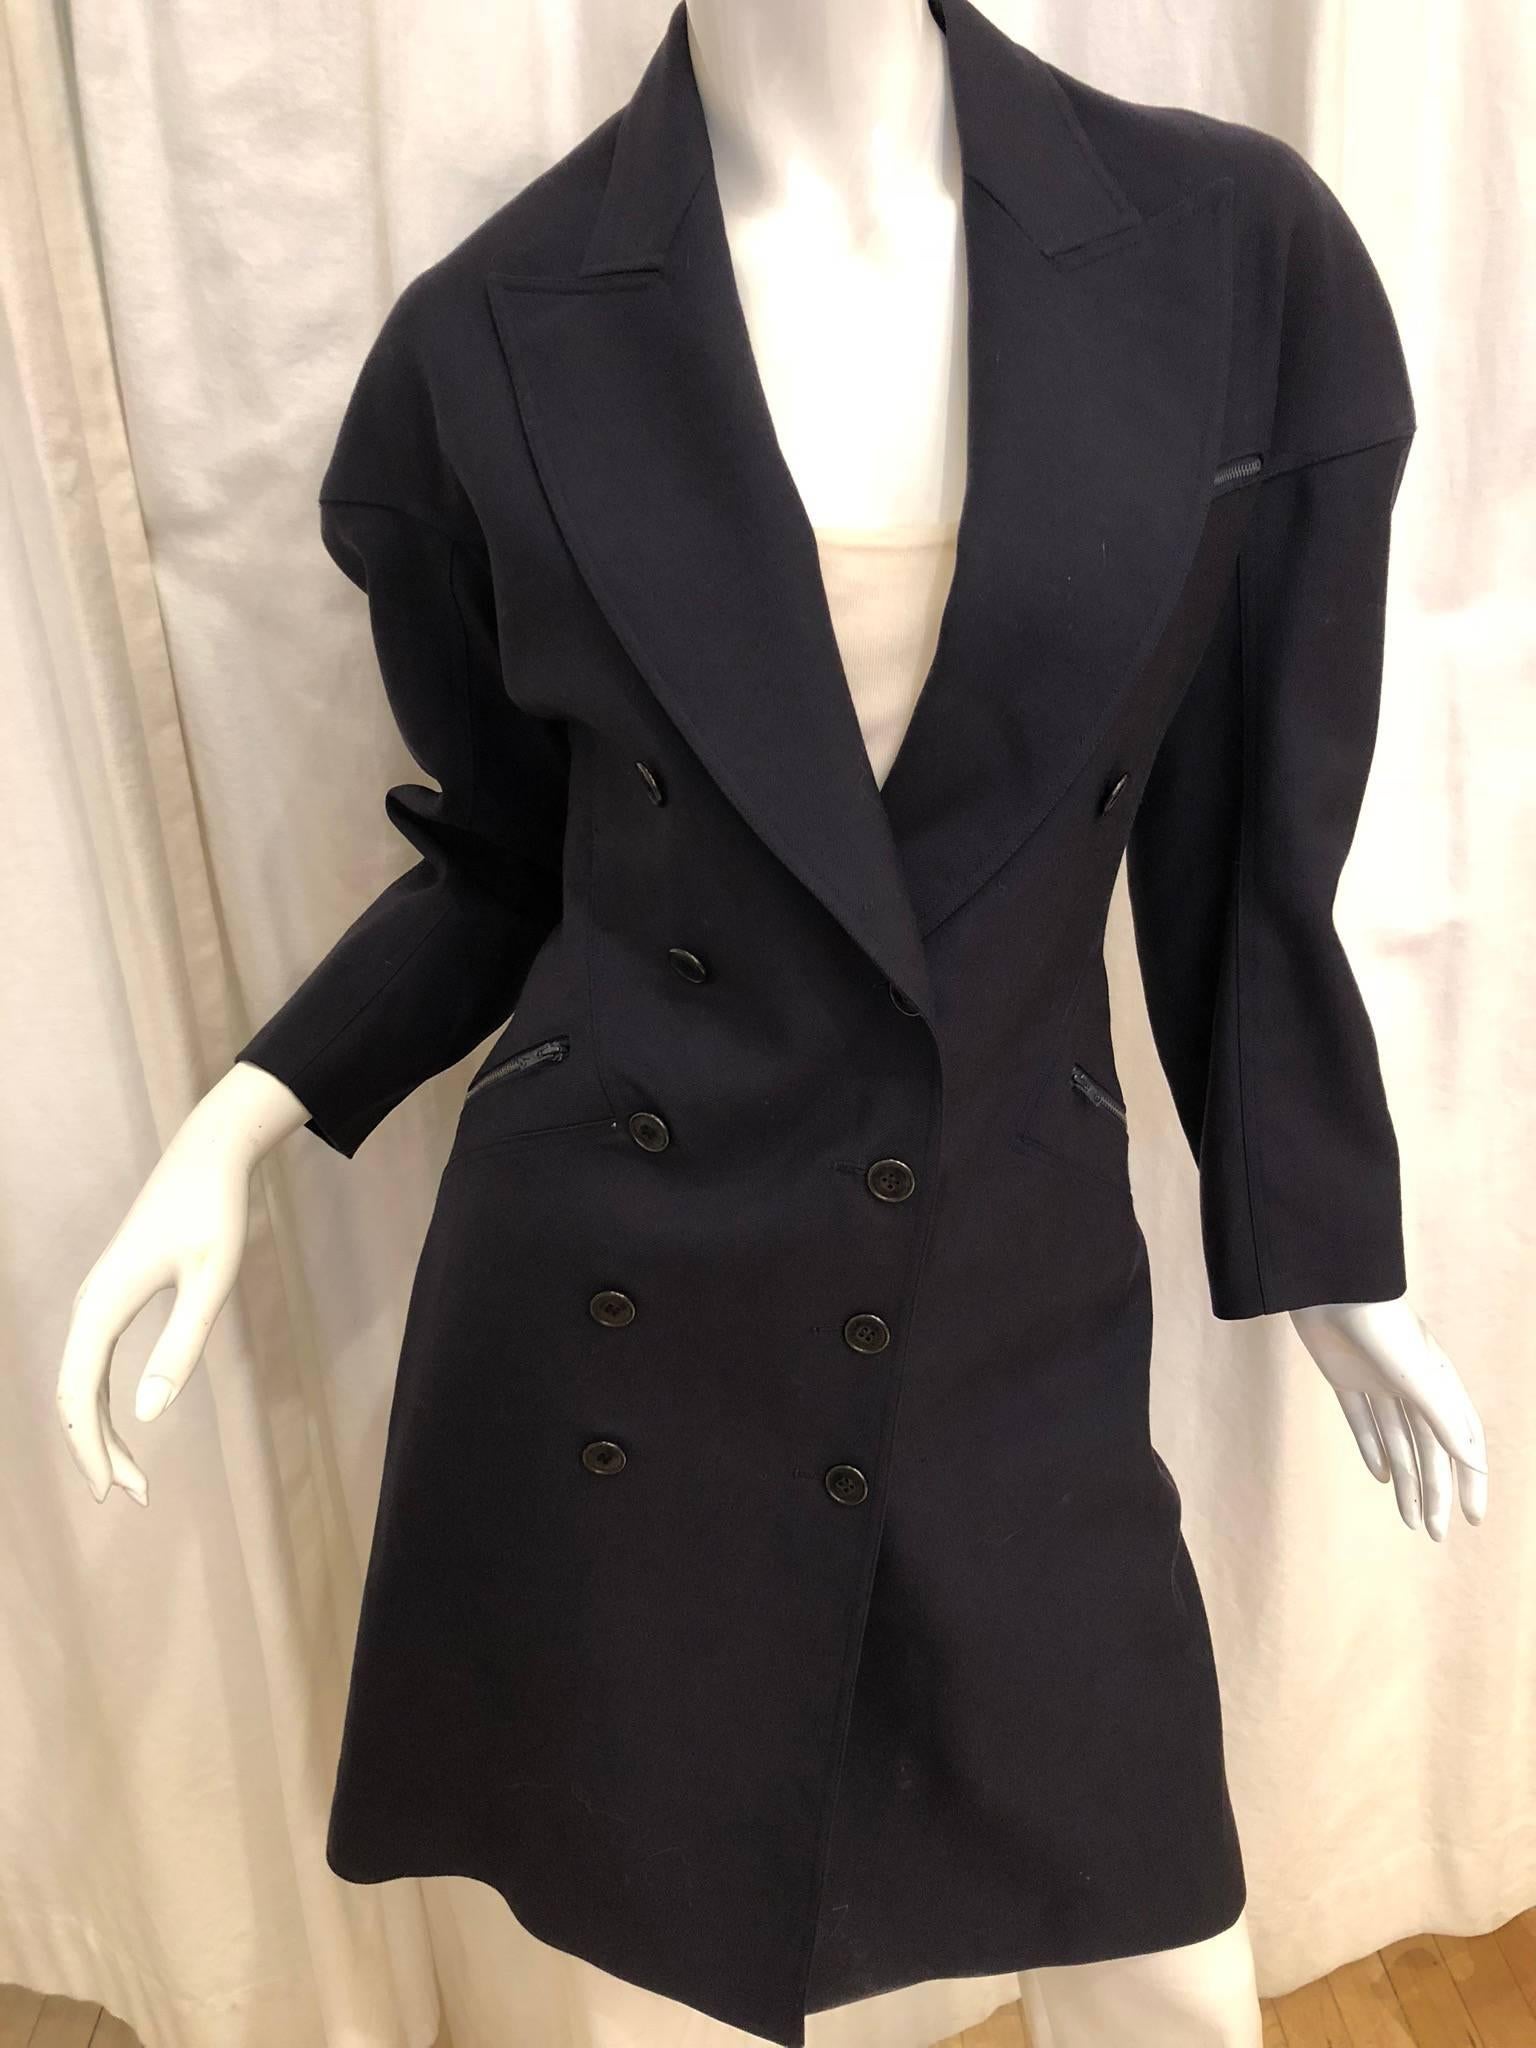 Alaia Double Breasted Coat with Triple Zipper Pocket and Peak Lapel Collar.